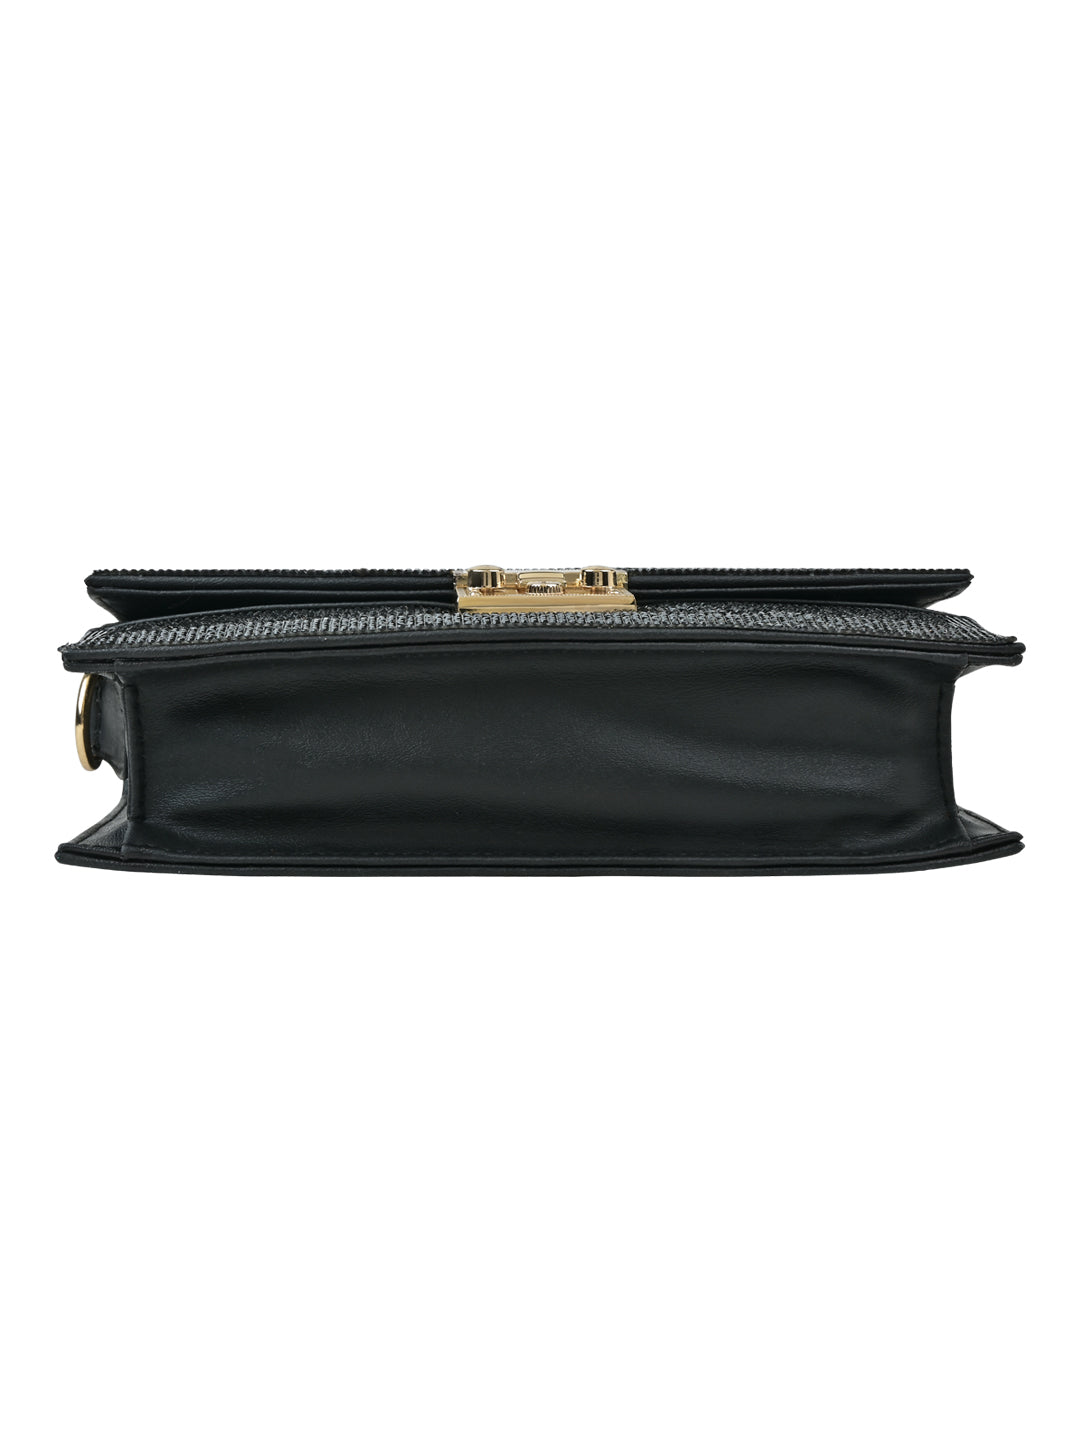 It is a must-have crossbody bag.